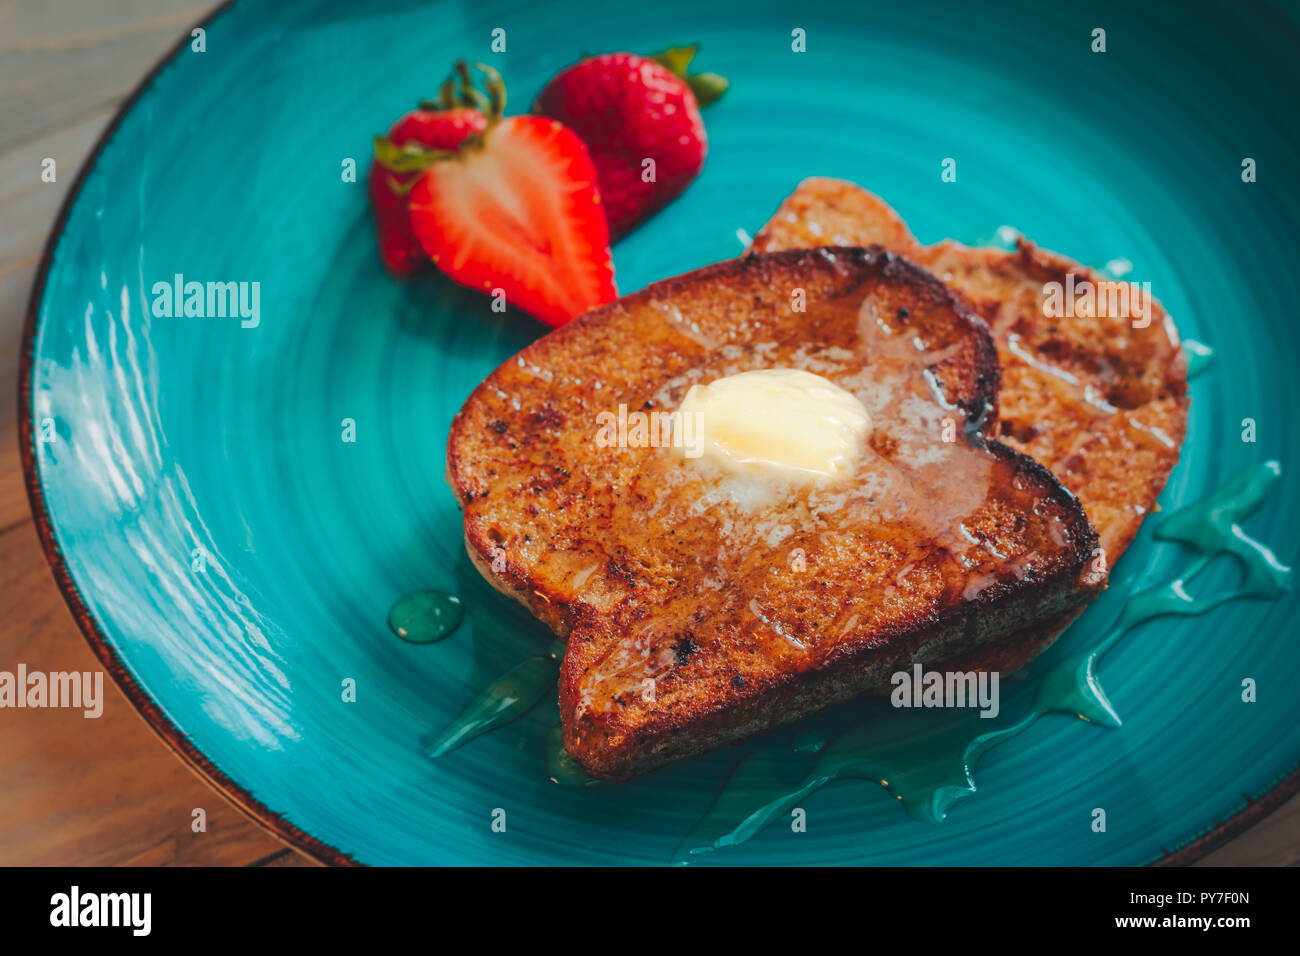 Homemade french toast with gluten free bread, strawberries and maple syrup Stock Photo